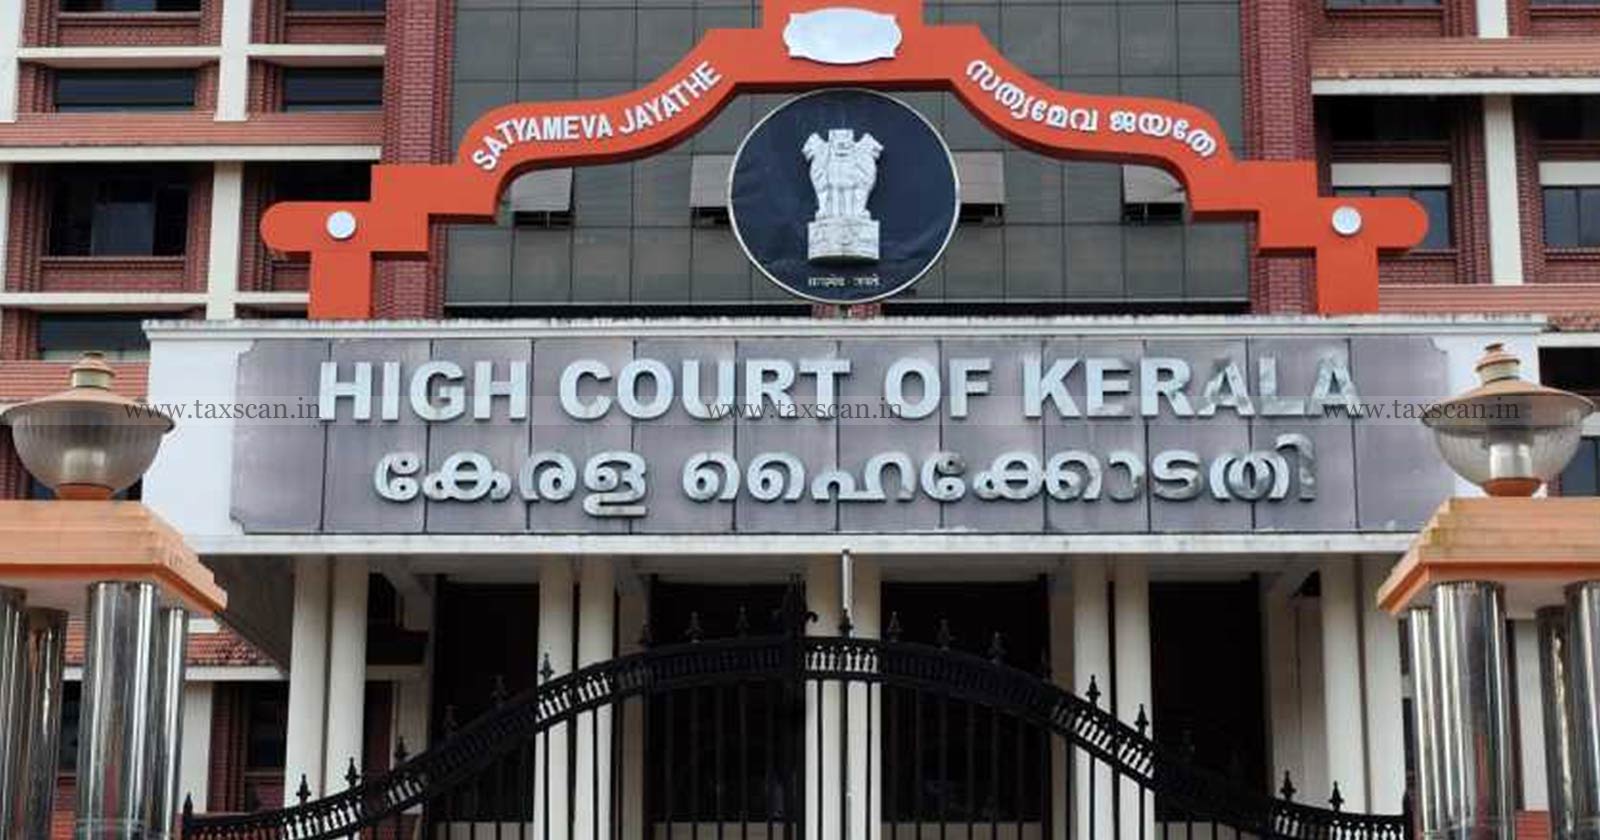 Gold carried in Pocket - Proper Documents - Sufficient to Suspect - GST Evasion - Kerala HighCourt - taxscan